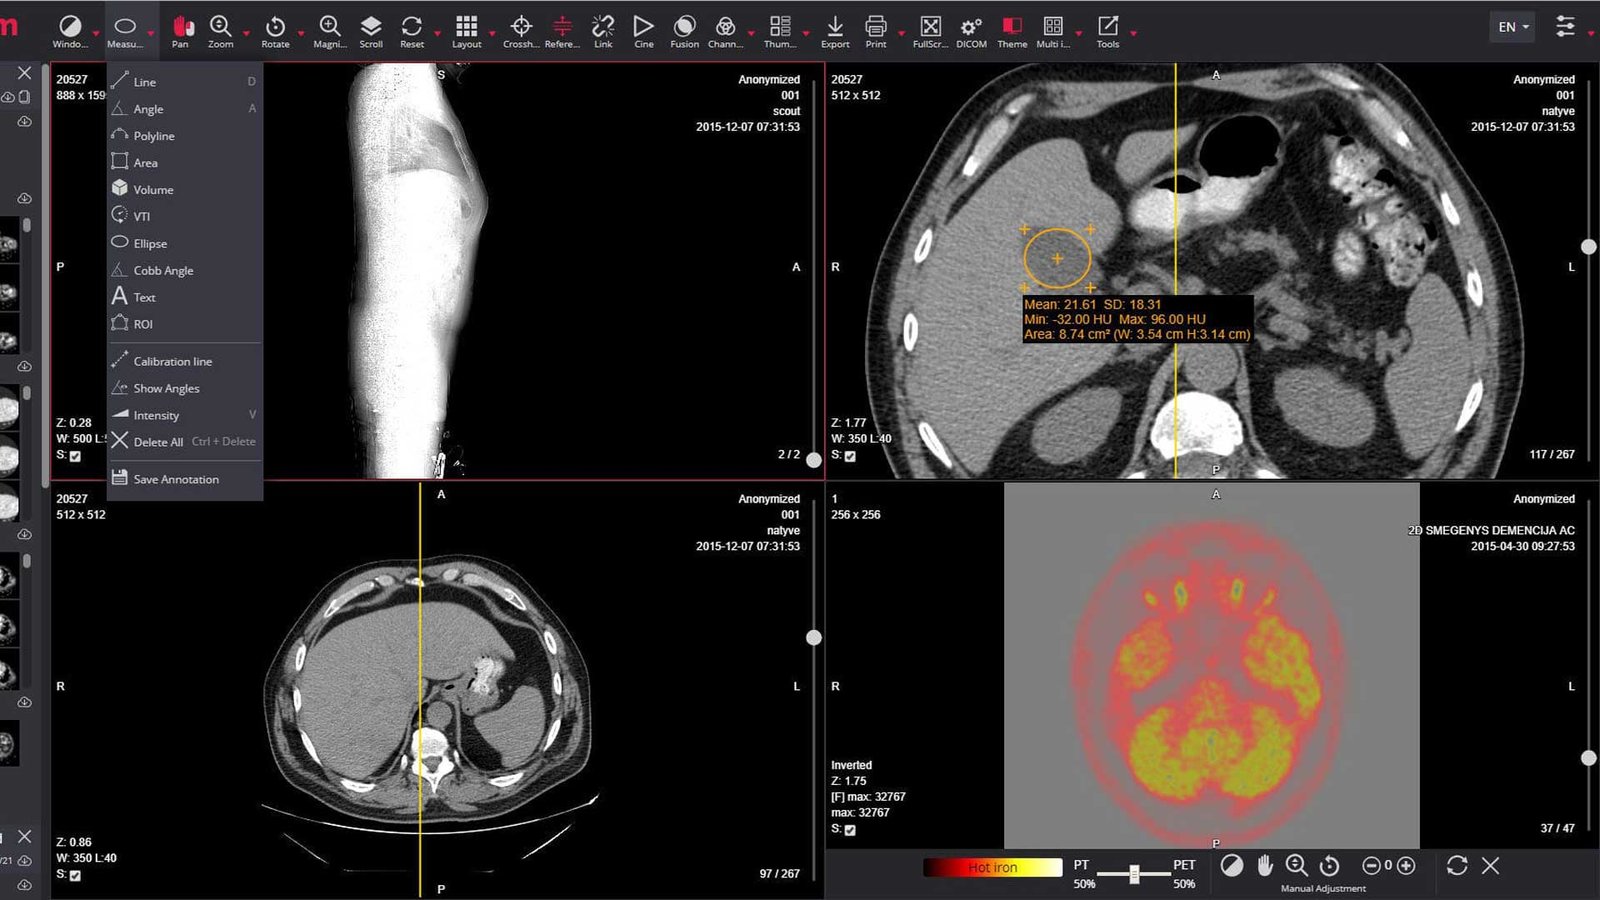 DICOM-PACS-Software-for-Medical-Imaging-on-CoreinFluencer